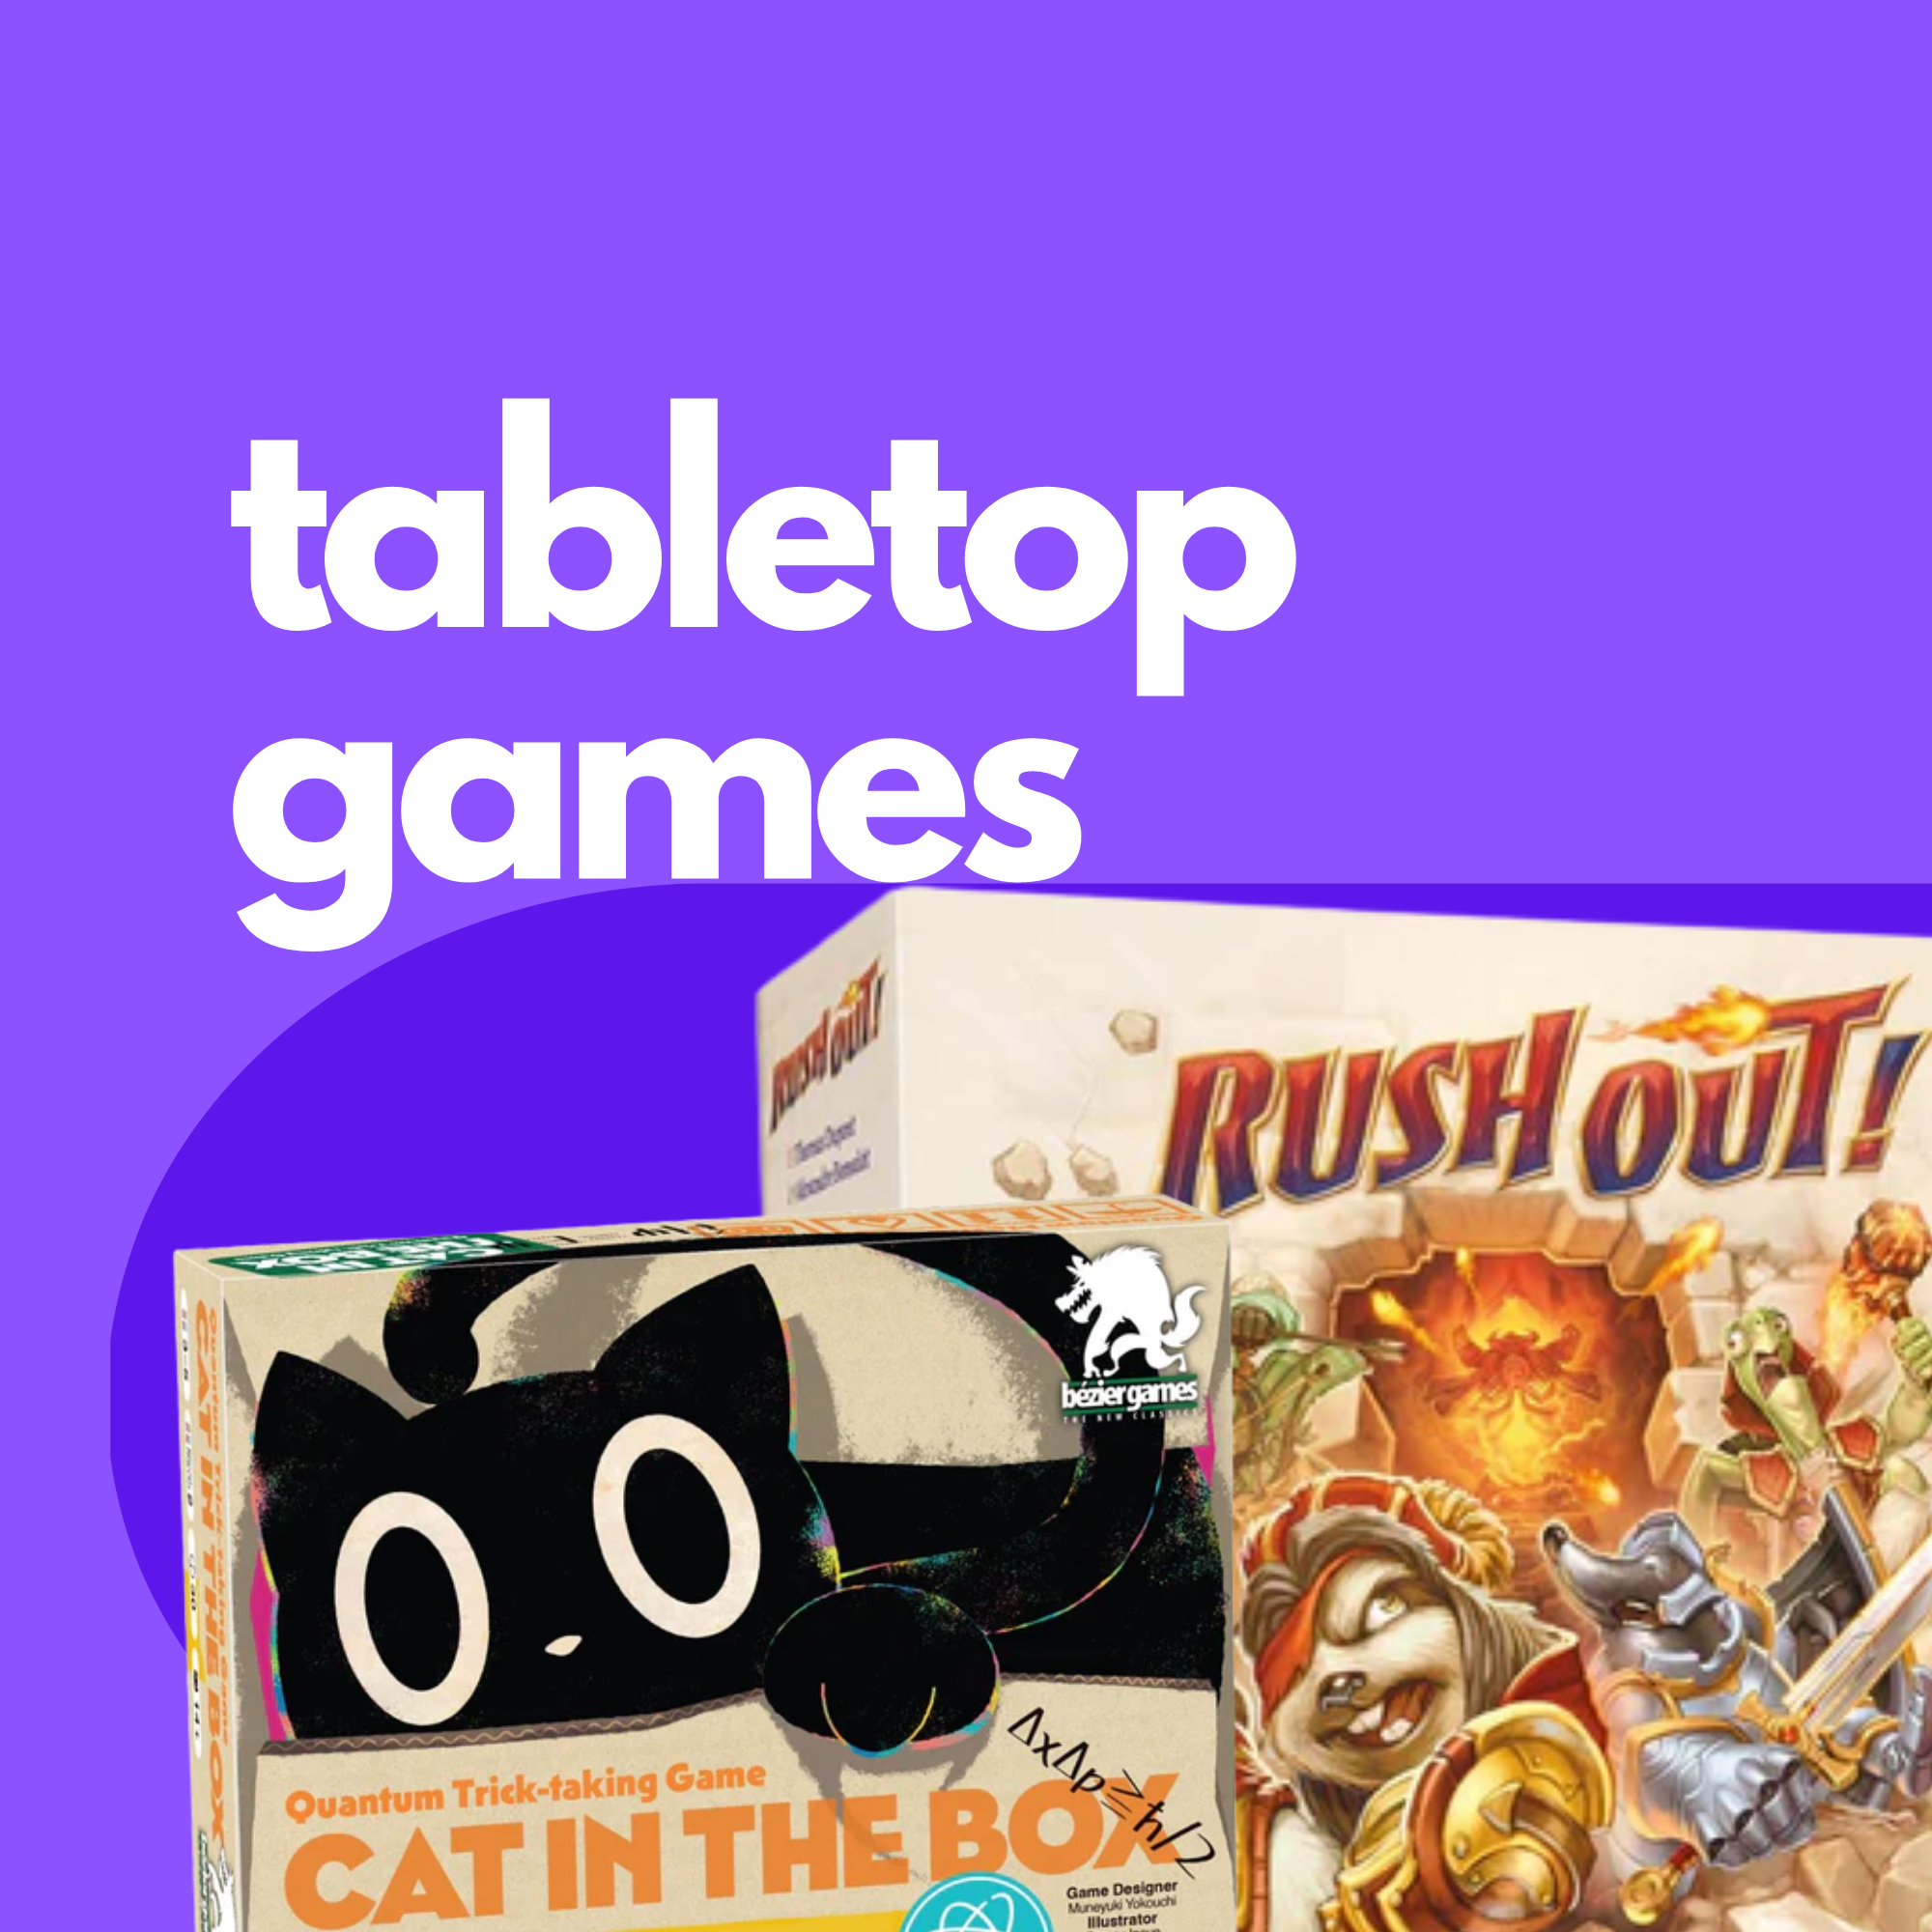 An image of various board games with the title tabletop games